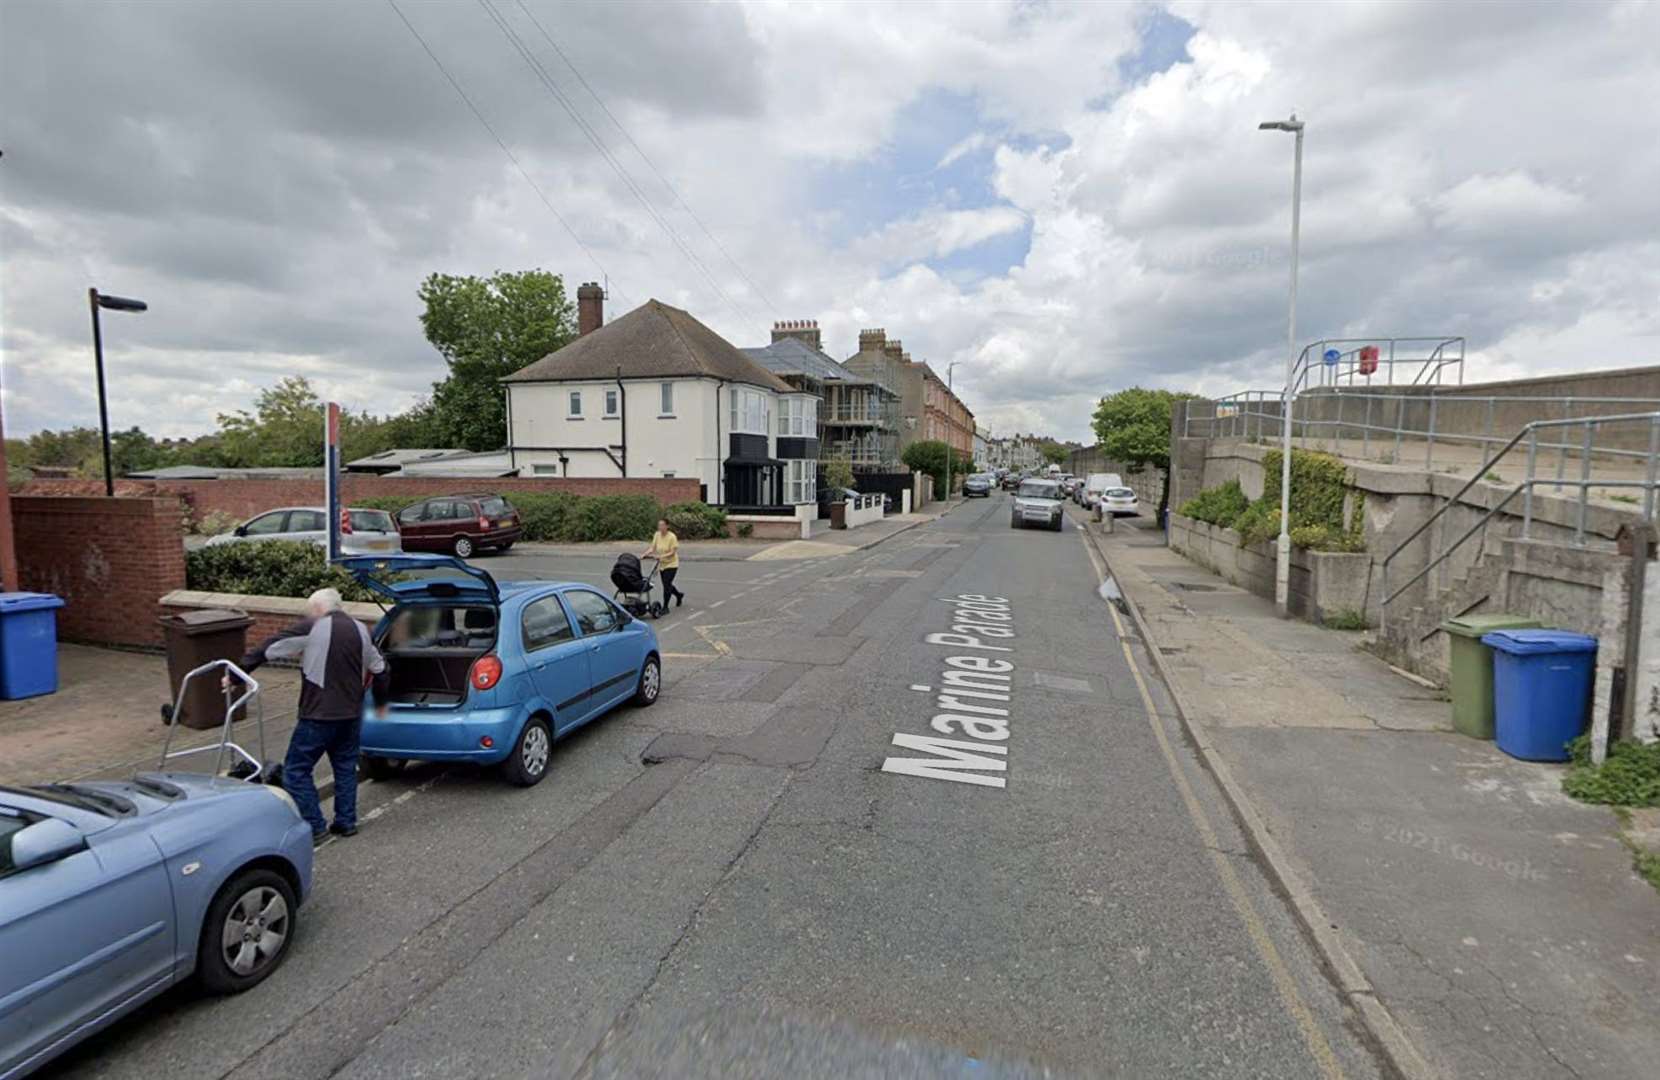 The burglary was in Marine Parade, Sheerness, near Oasis Academy. Picture: Google Maps